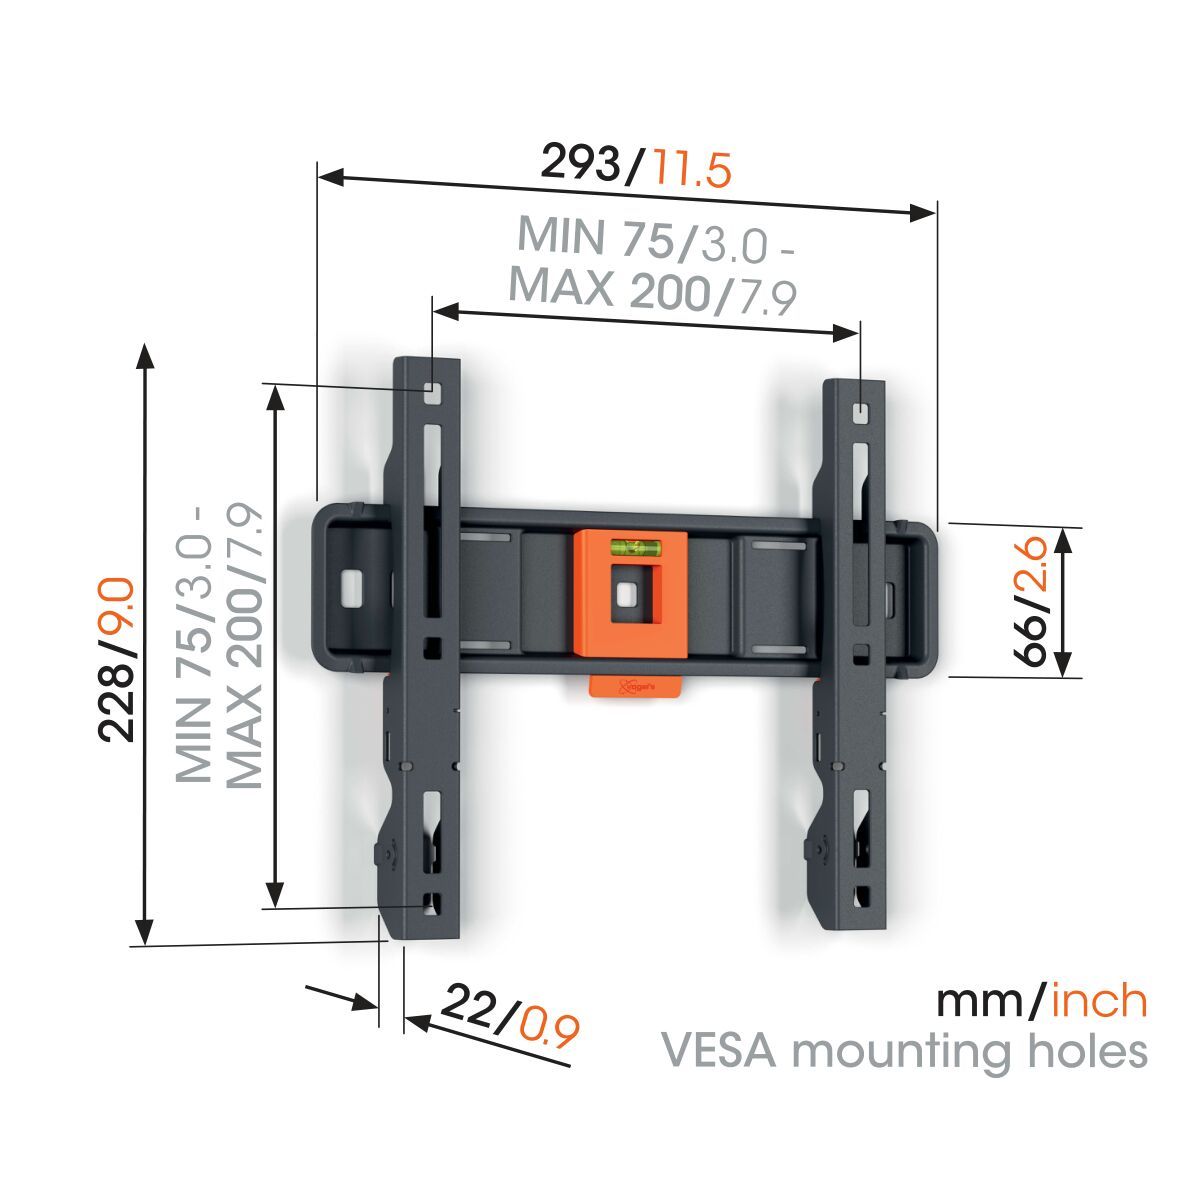 Vogel's TVM 1205 Fixed TV Wall Mount - Suitable for 19 up to 50 inch TVs - Dimensions